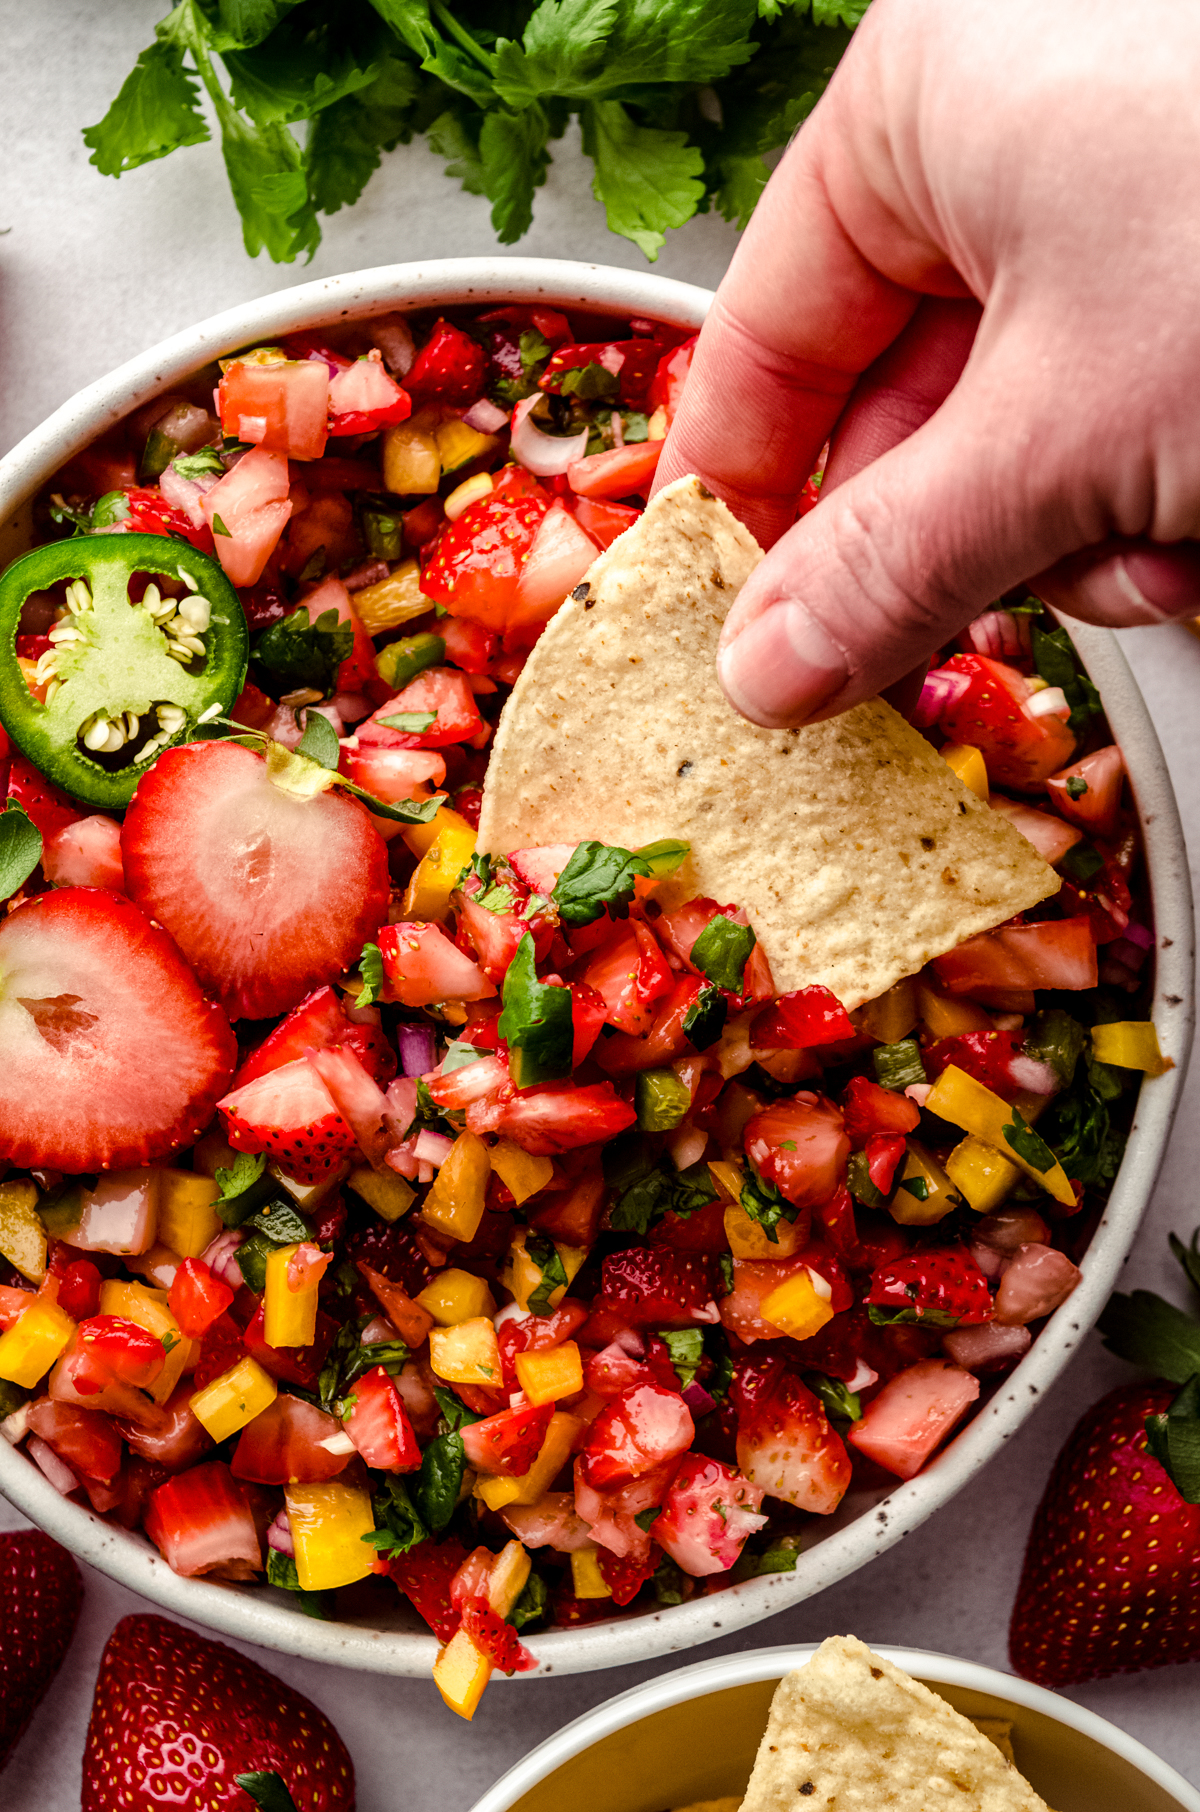 Someone is dipping a tortilla chip into a bowl of fresh strawberry salsa.